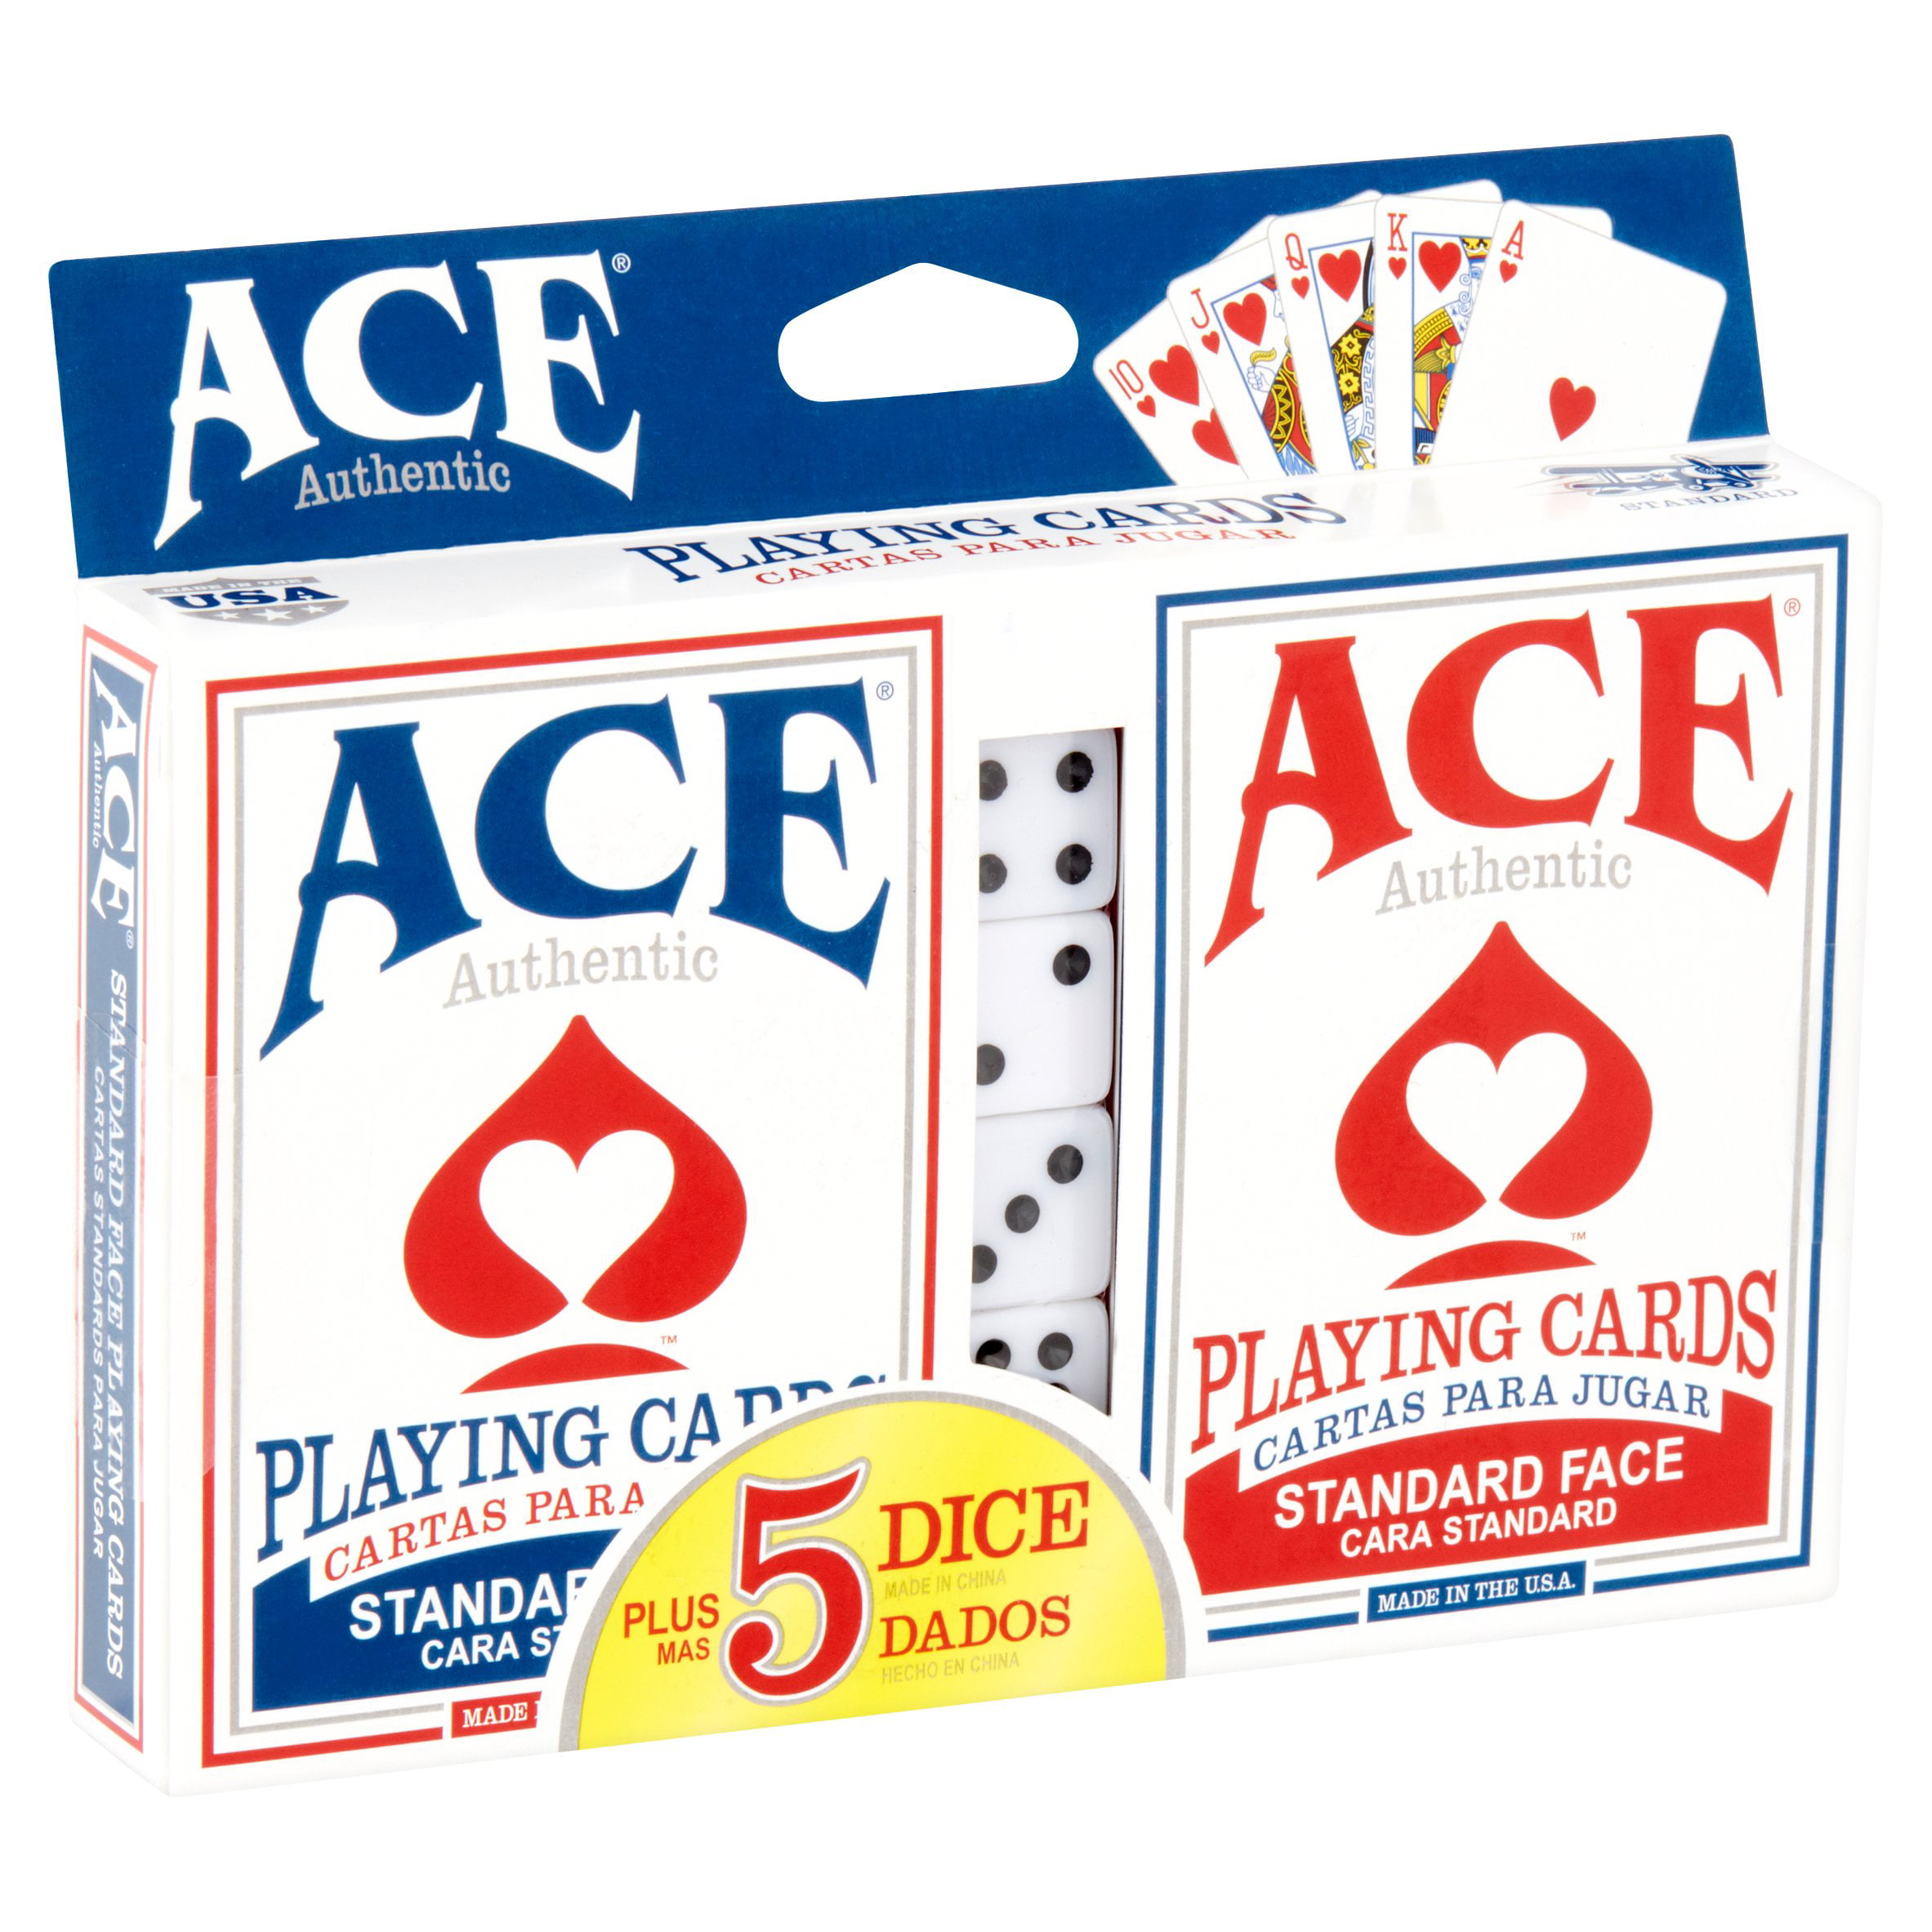 *BRAND NEW* 4 Decks of Authentic Ace Playing Cards Rules for 25 Family Games